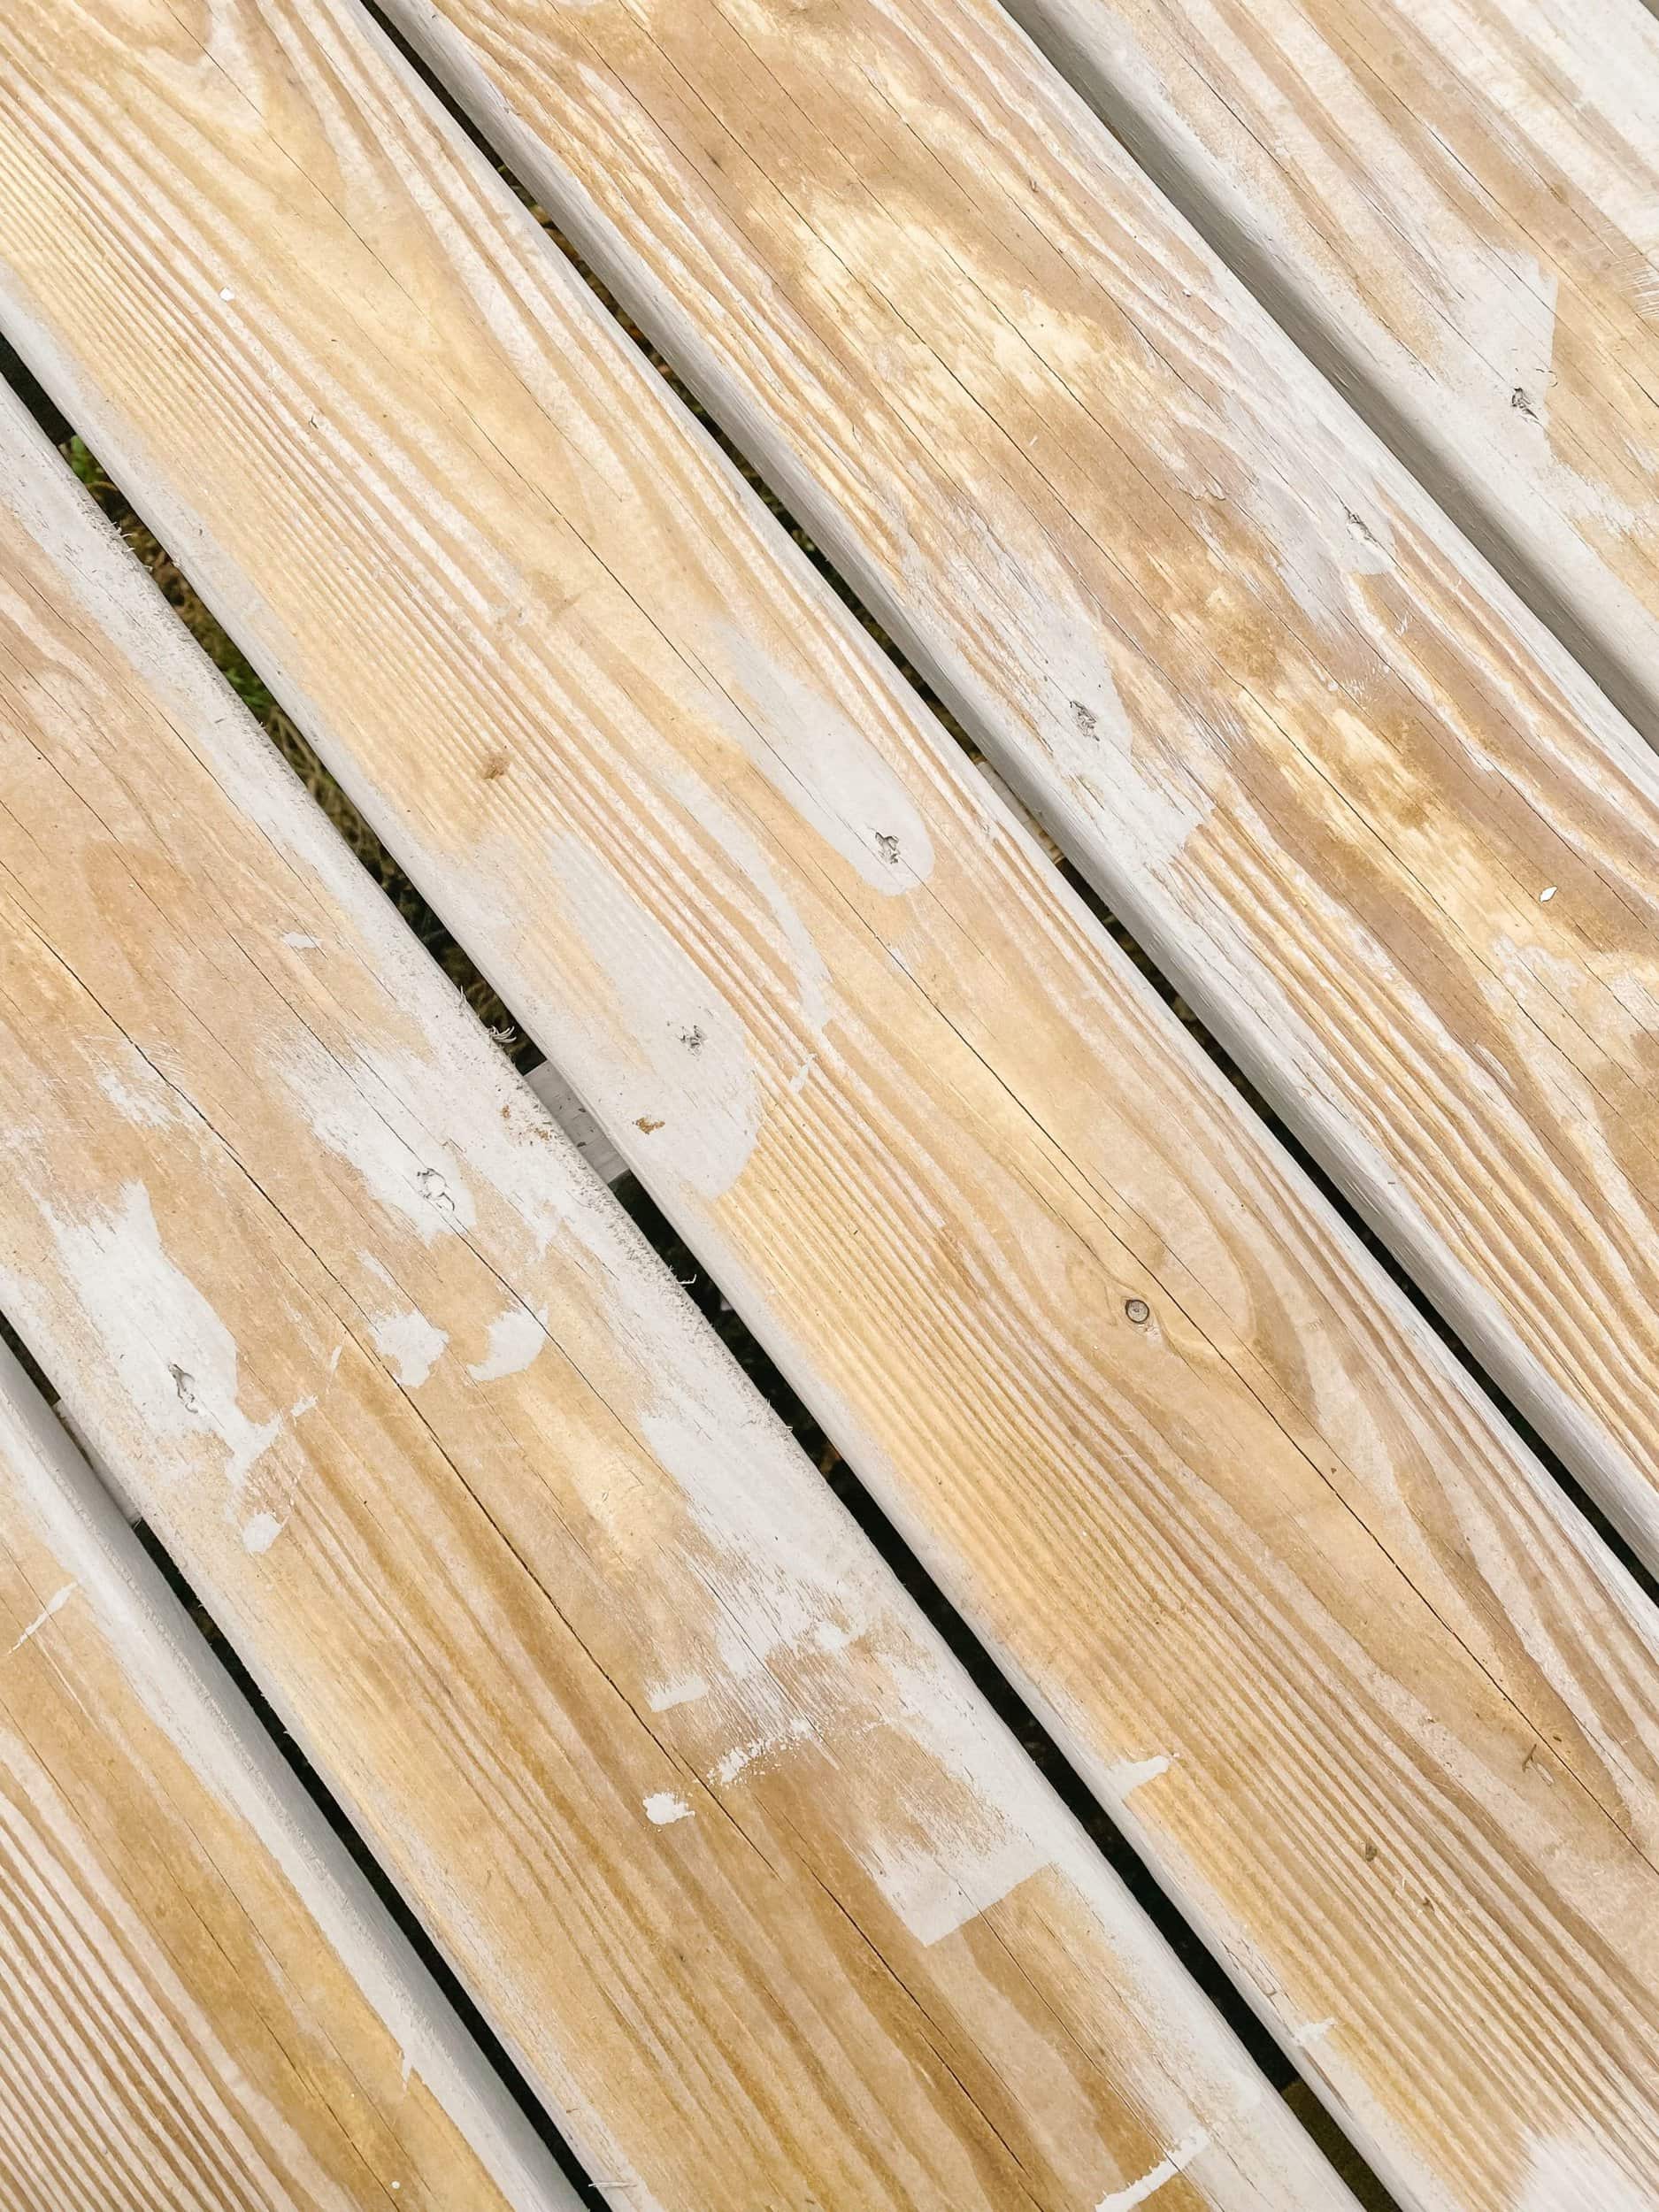 Staining between the boards and the nail heads of a pressure treated deck